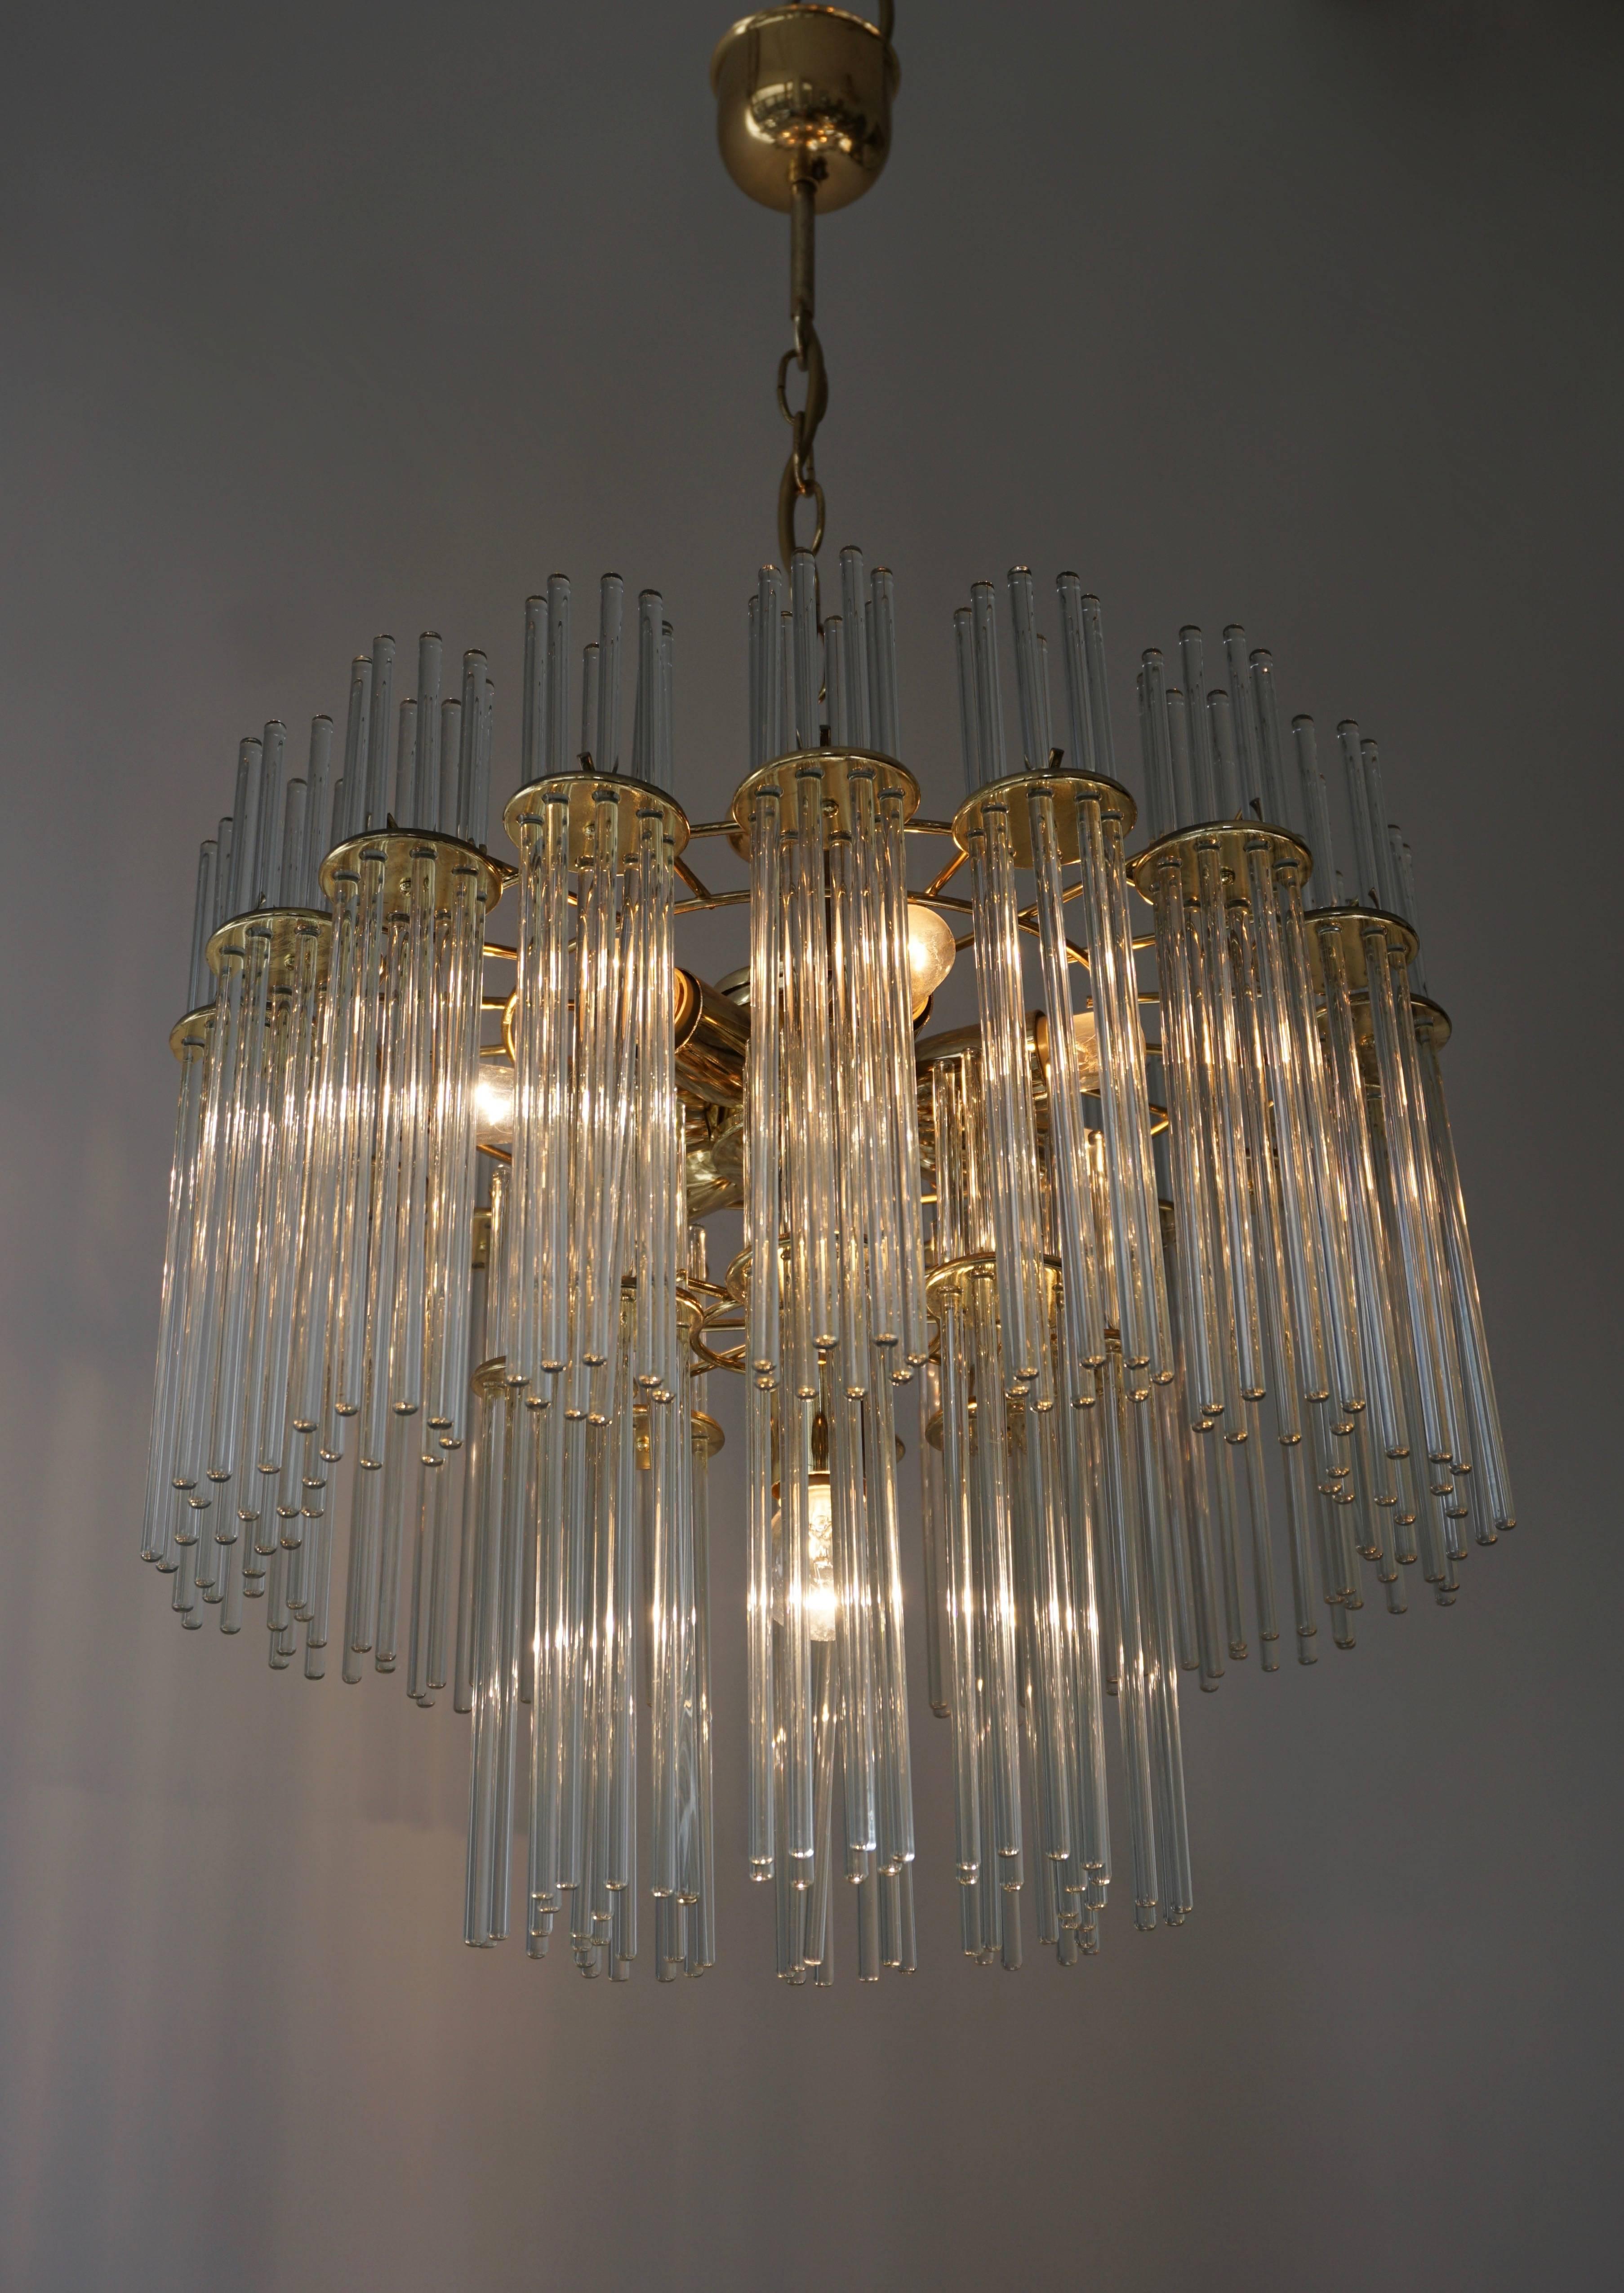 Italian Murano glass and brass chandelier.
Measures: Diameter: 42 cm.
Height fixture 42 cm.
Total height with the chain: 75 cm.